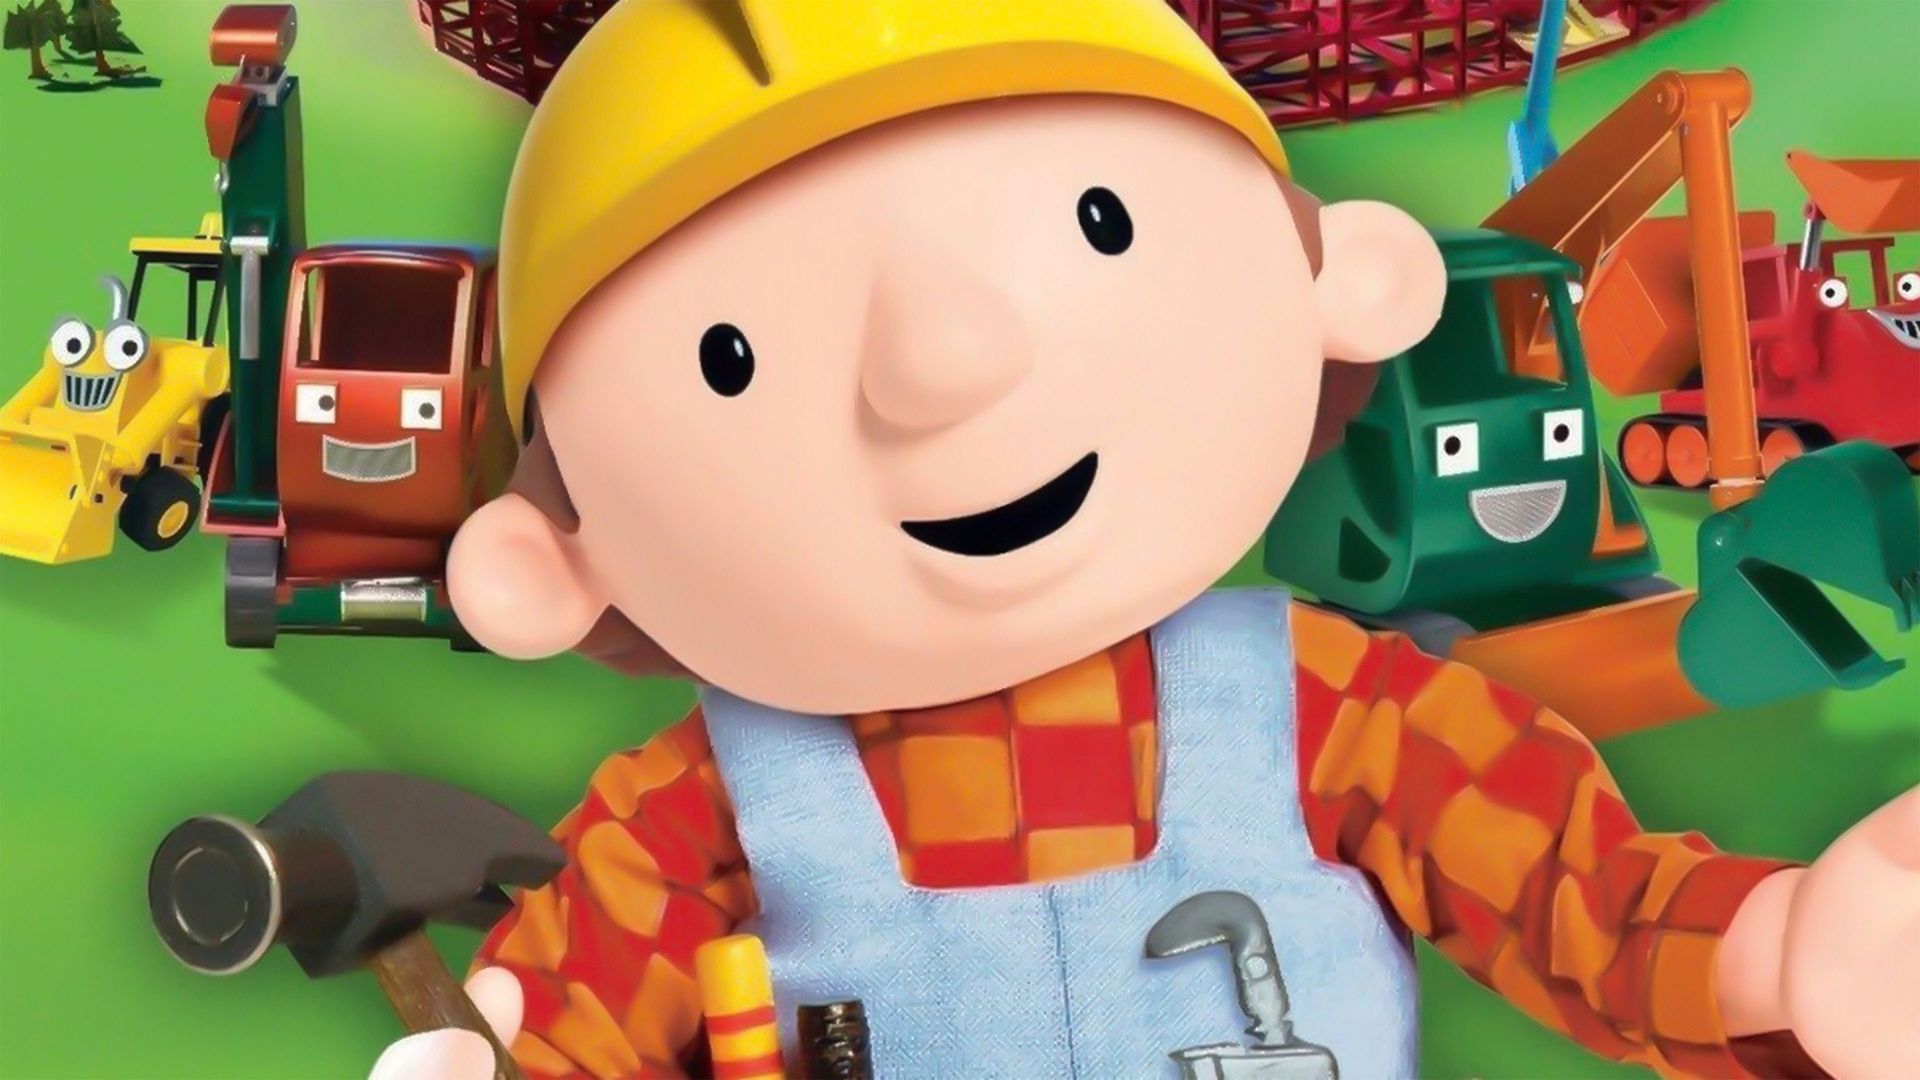 Bob the Builder: A Christmas to Remember Backdrop